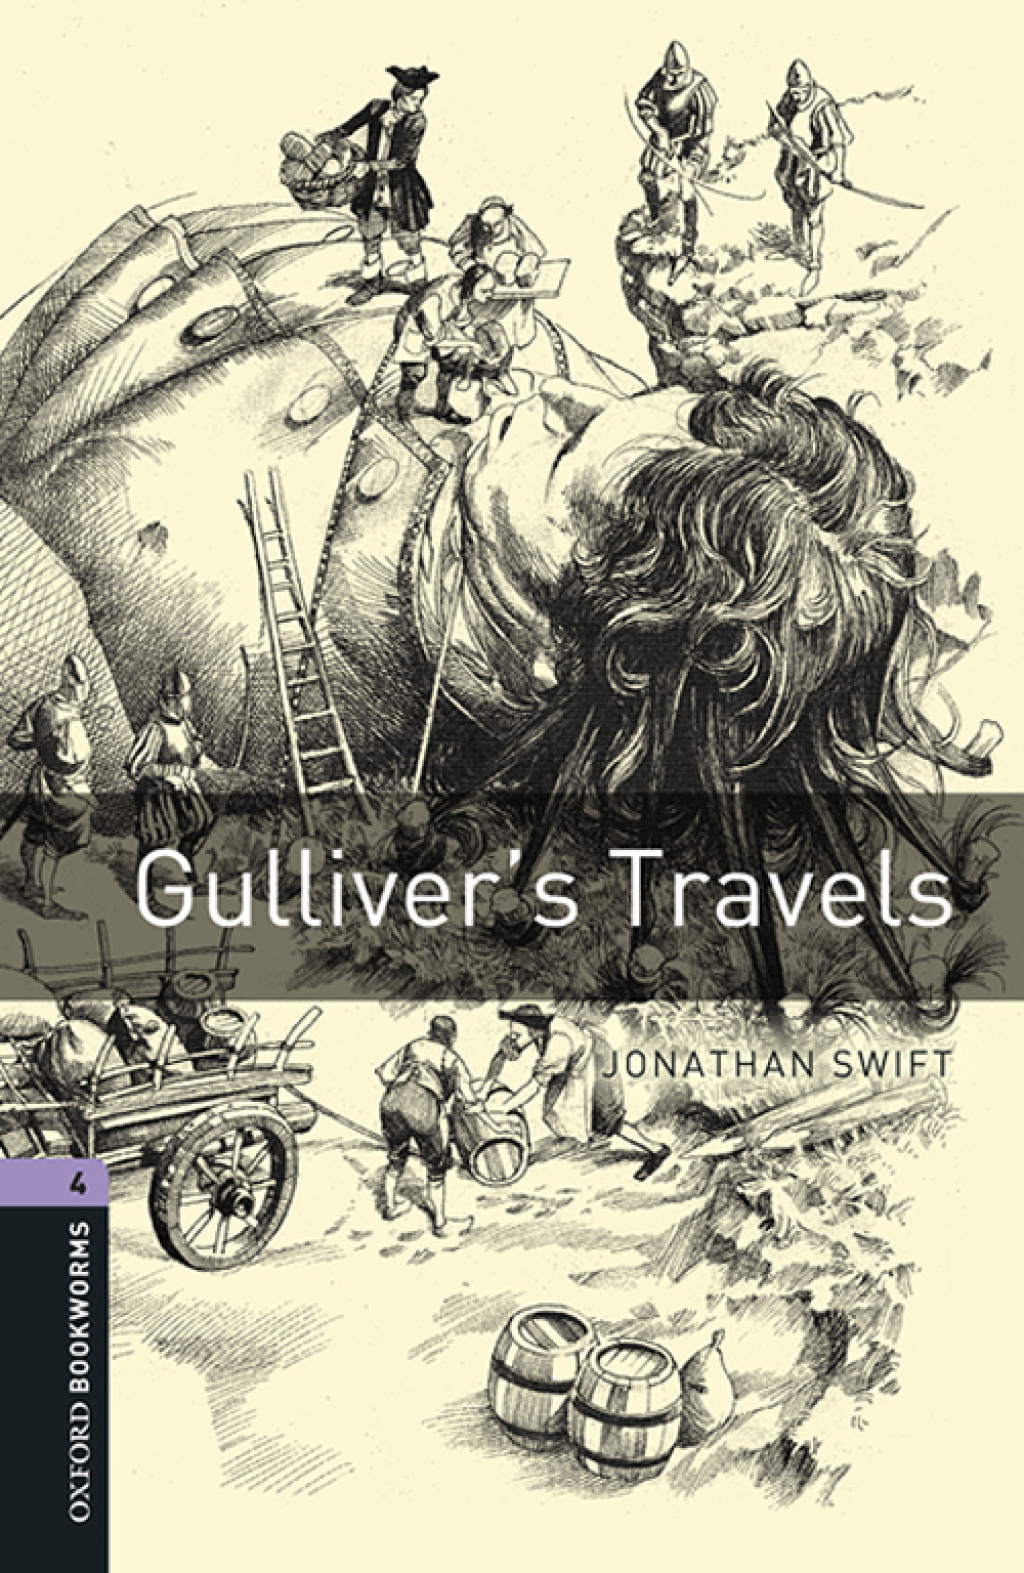 Gulliver's Travels Level 4 Oxford Bookworms Library - 3rd Edition (eBook Rental)